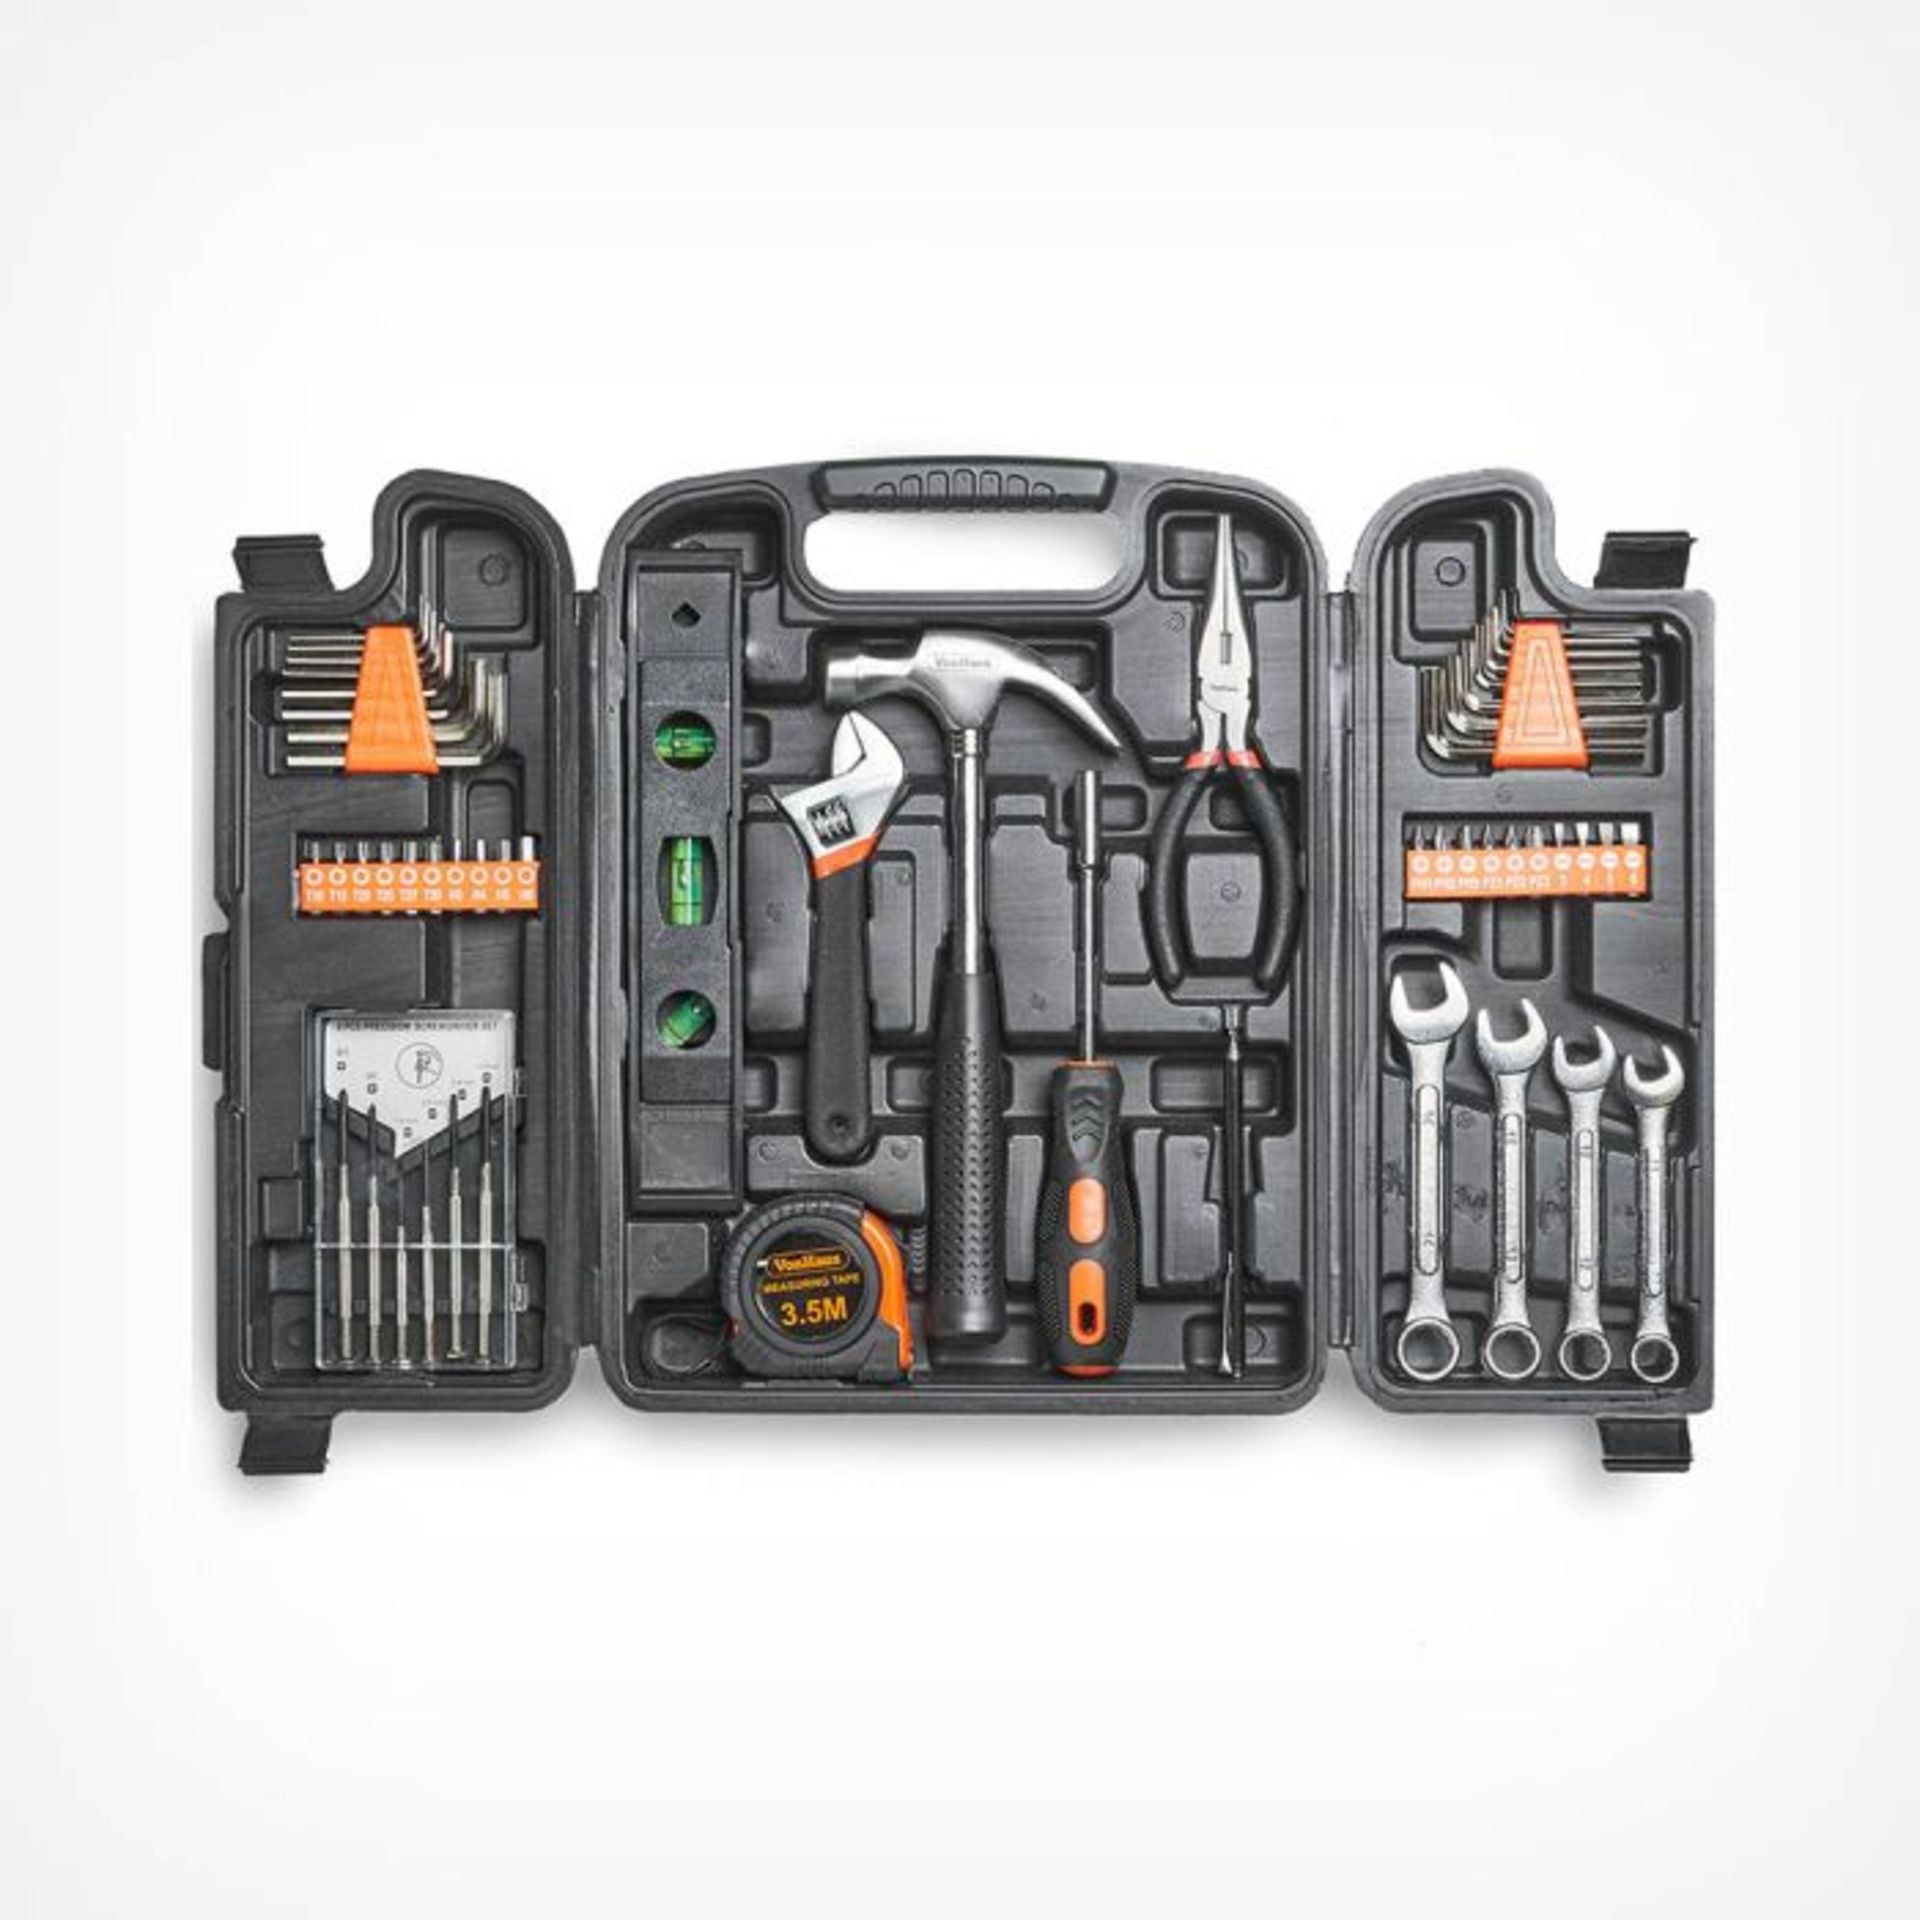 53pc Household Tool Set. - PW. The set comes with a strong blow-moulded storage case with clearly